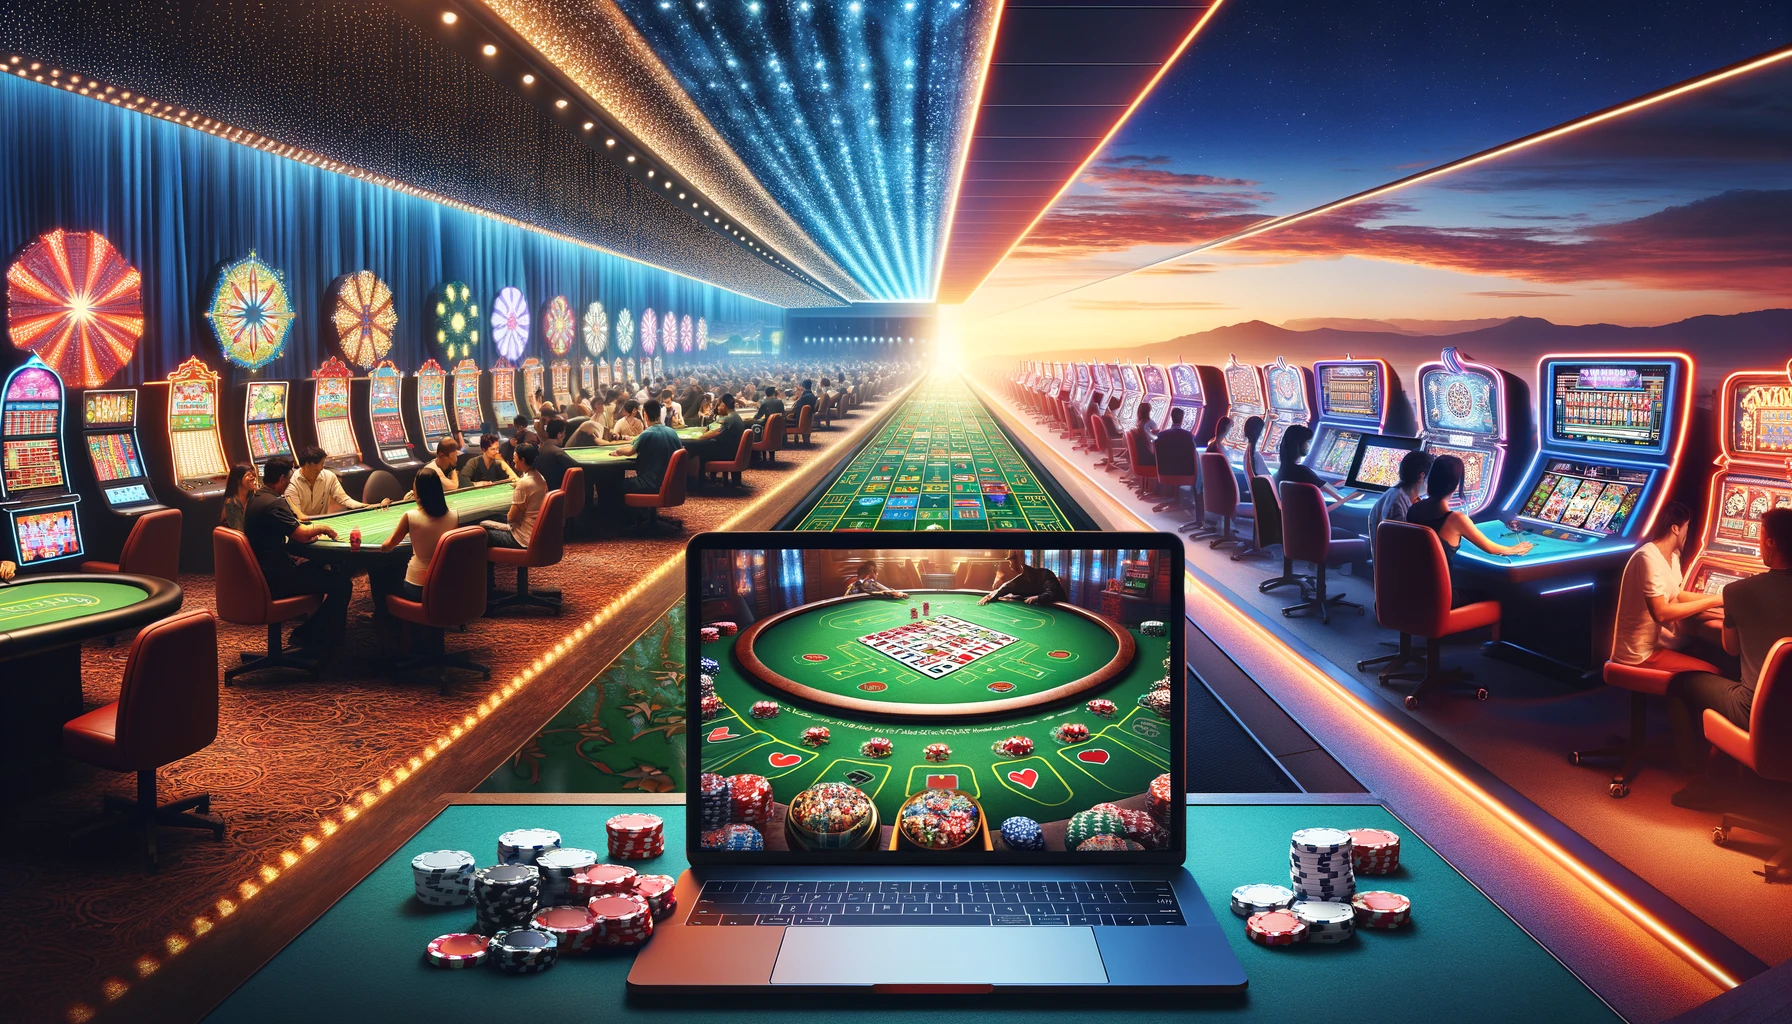 Play Andar Bahar Online: Why It’s Time to Switch from Traditional Casinos